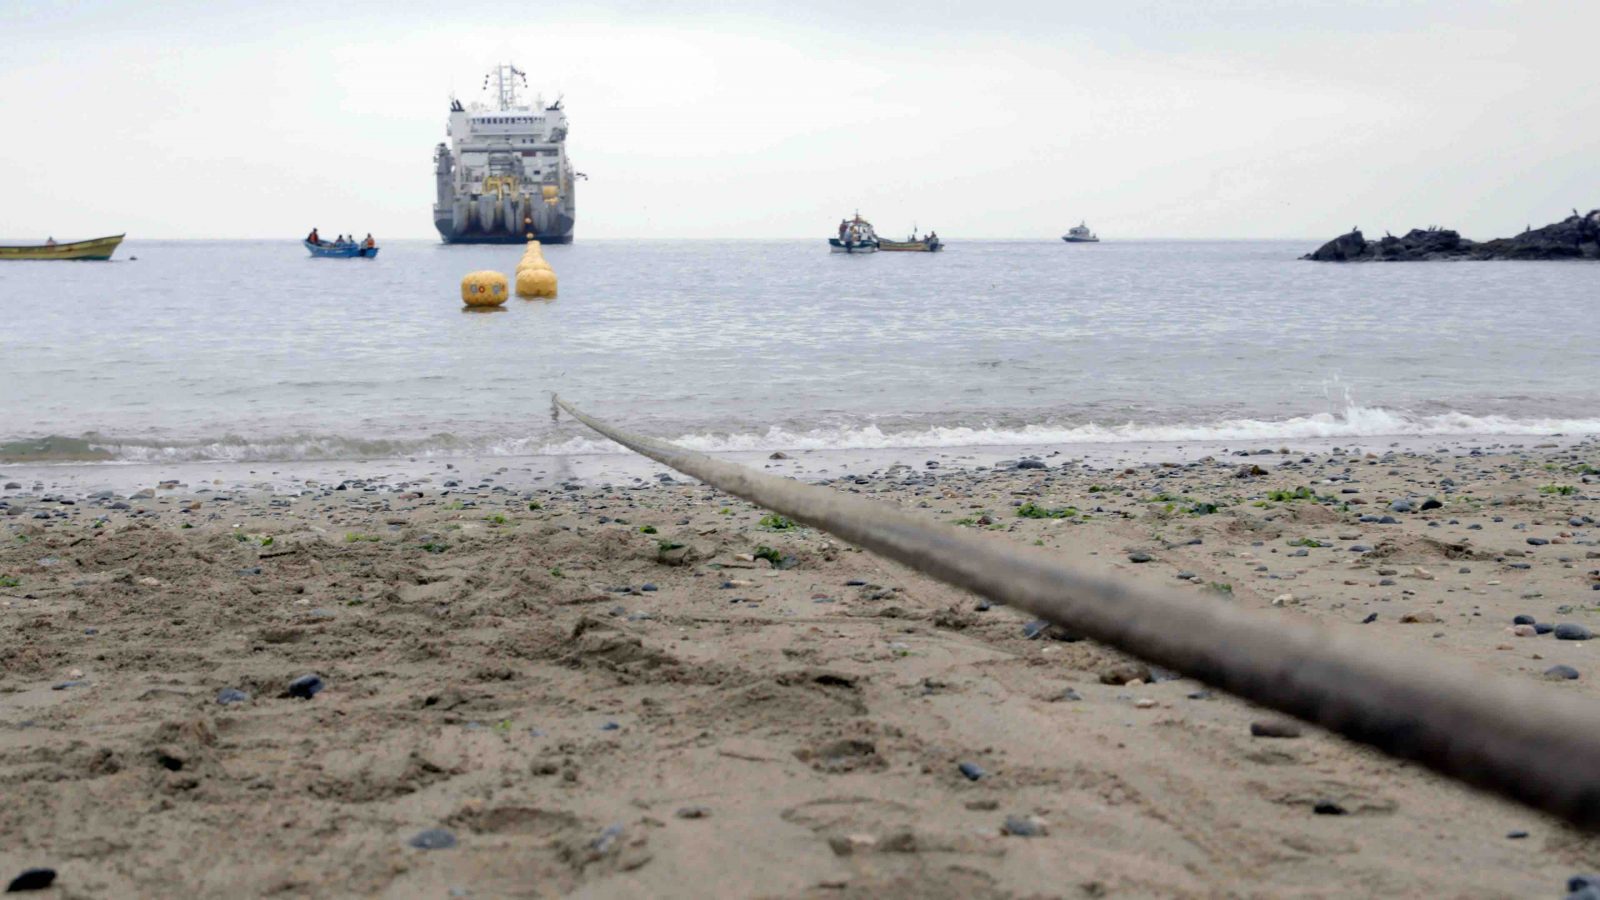 Curie, a Google-owned subsea cable successfully landing and connecting to Chile